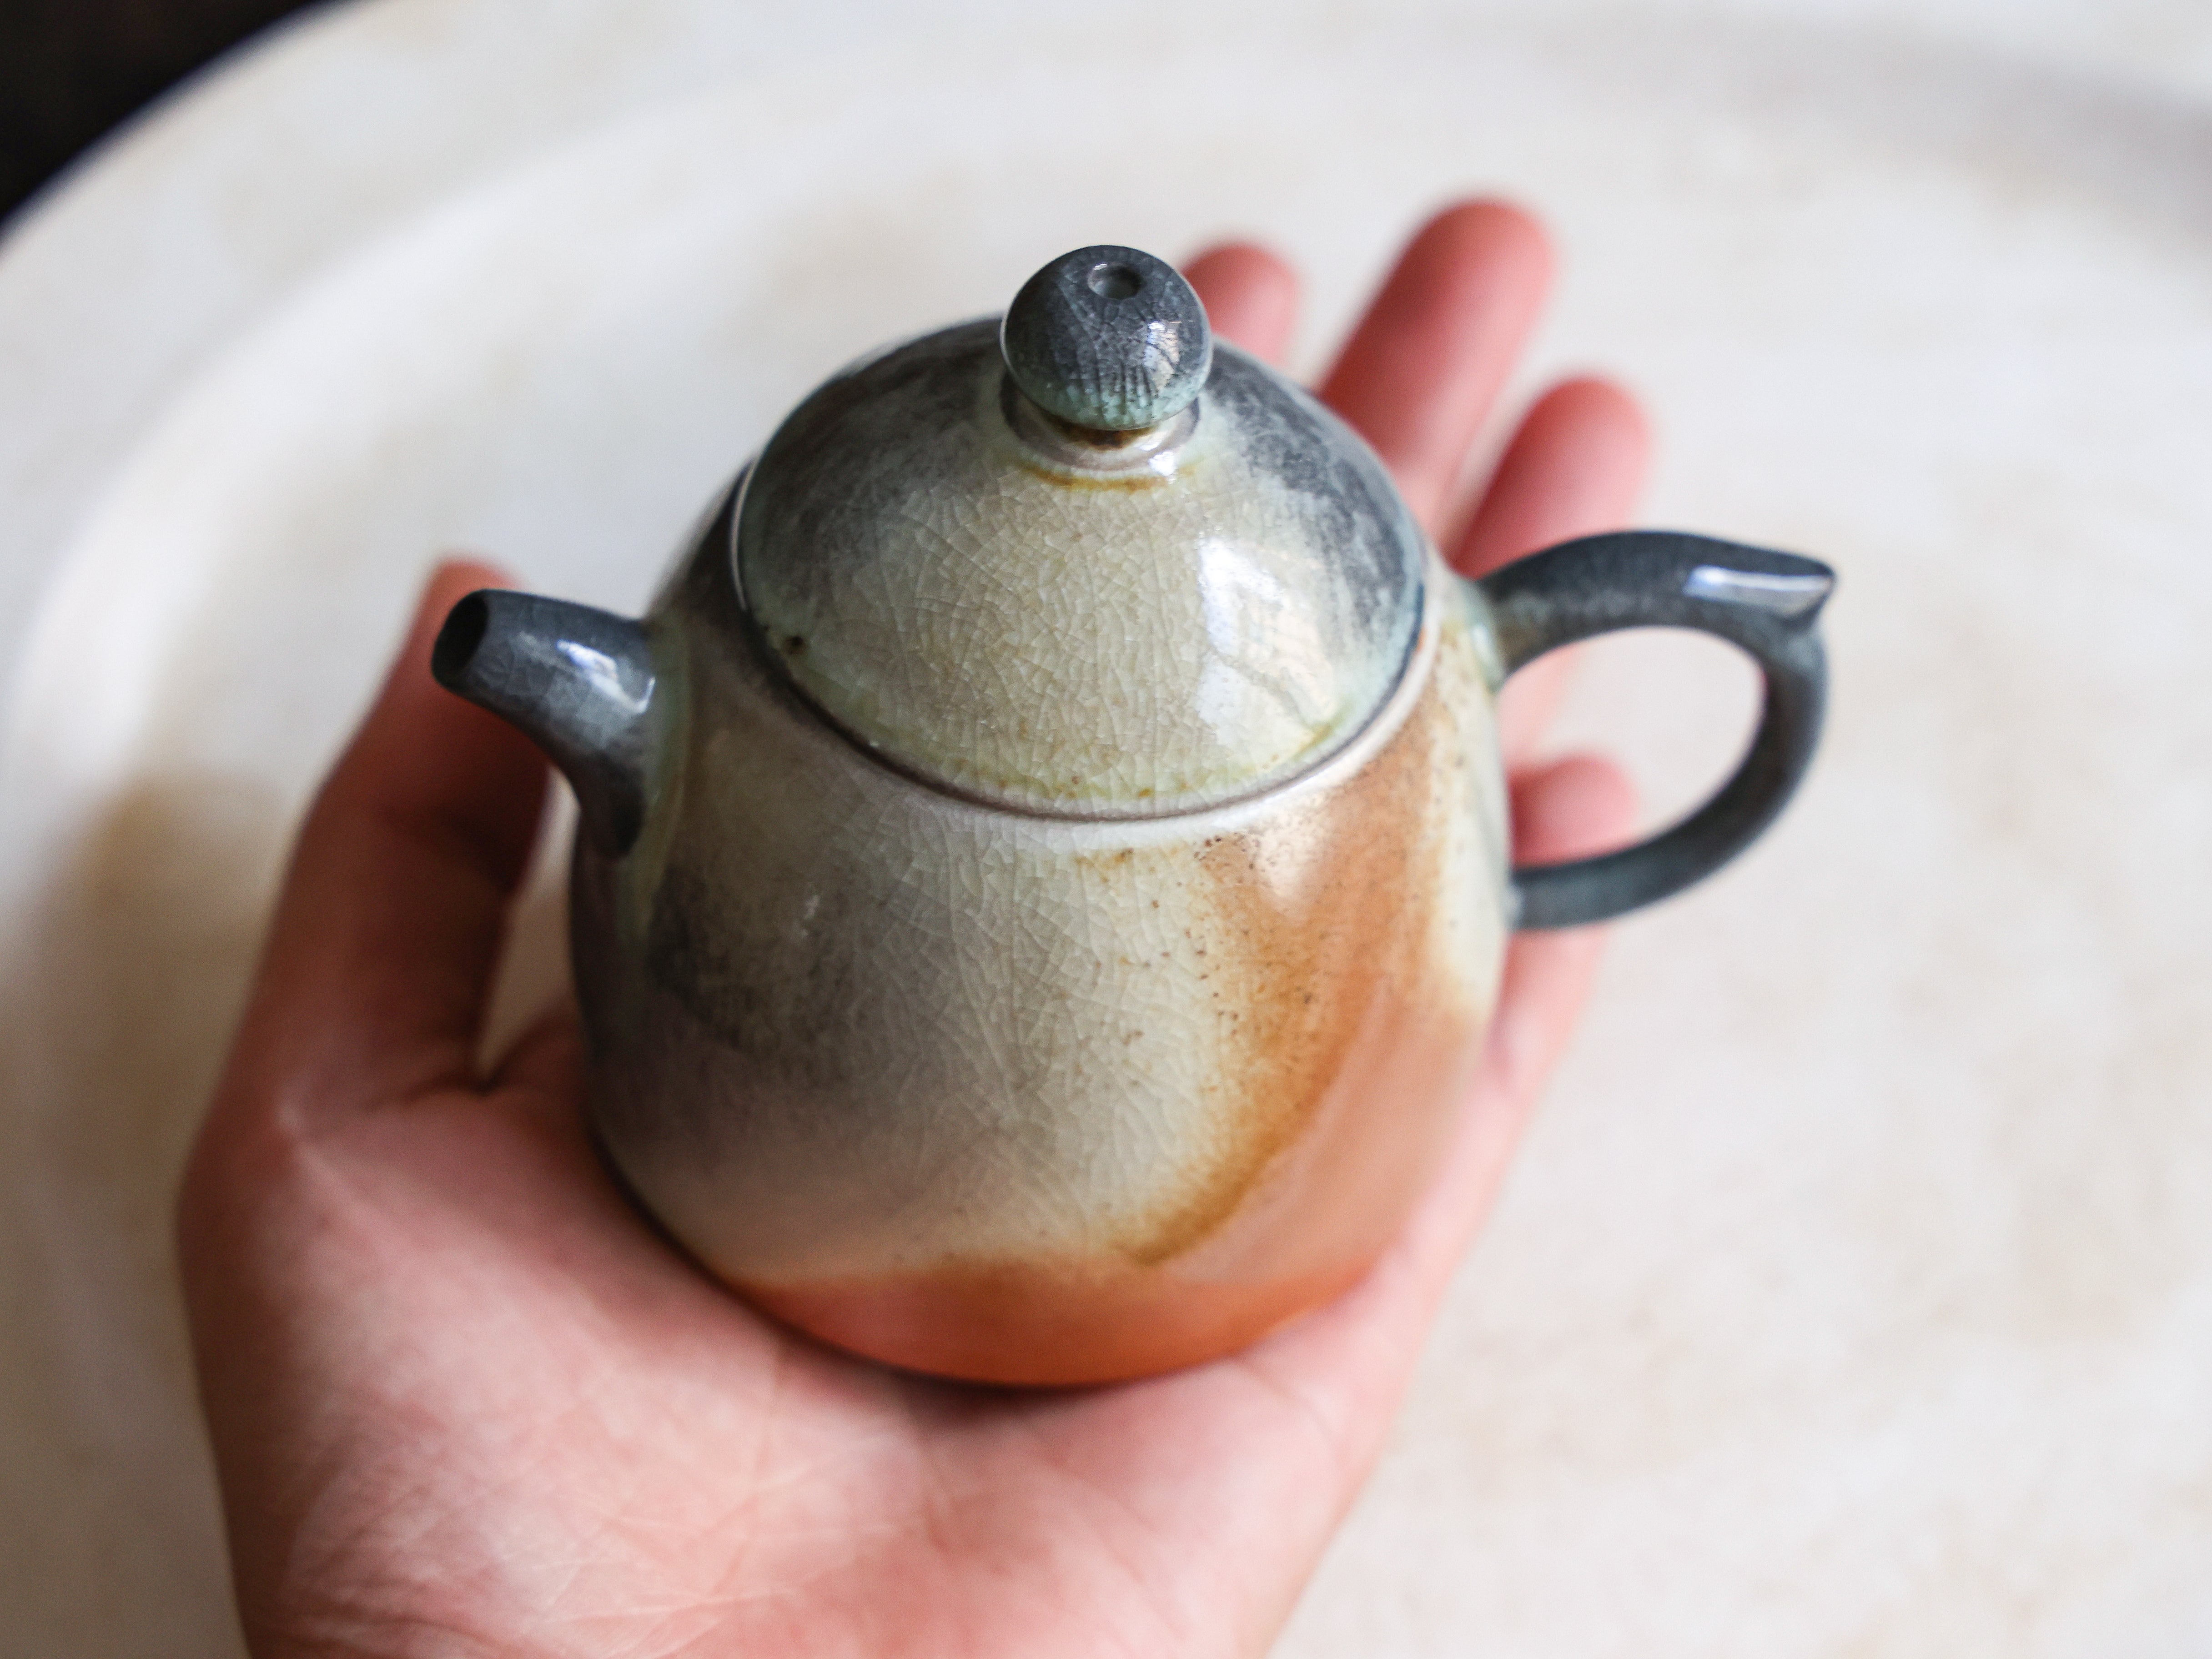 Dripping Woodfired Teapot